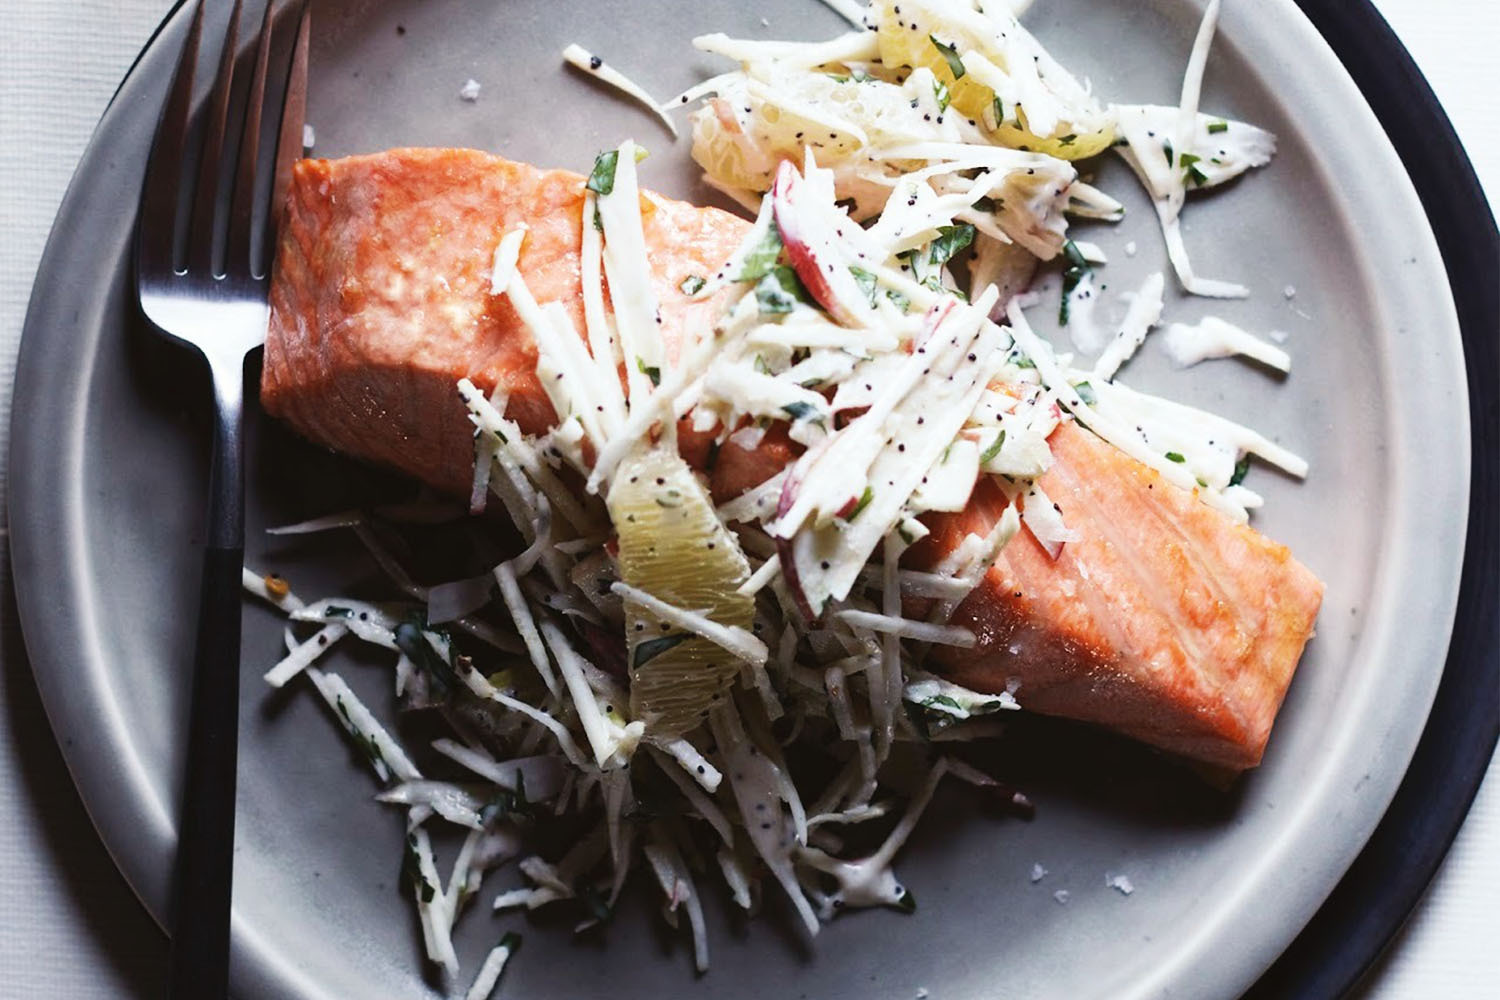 Salmon and slaw meal on a plate